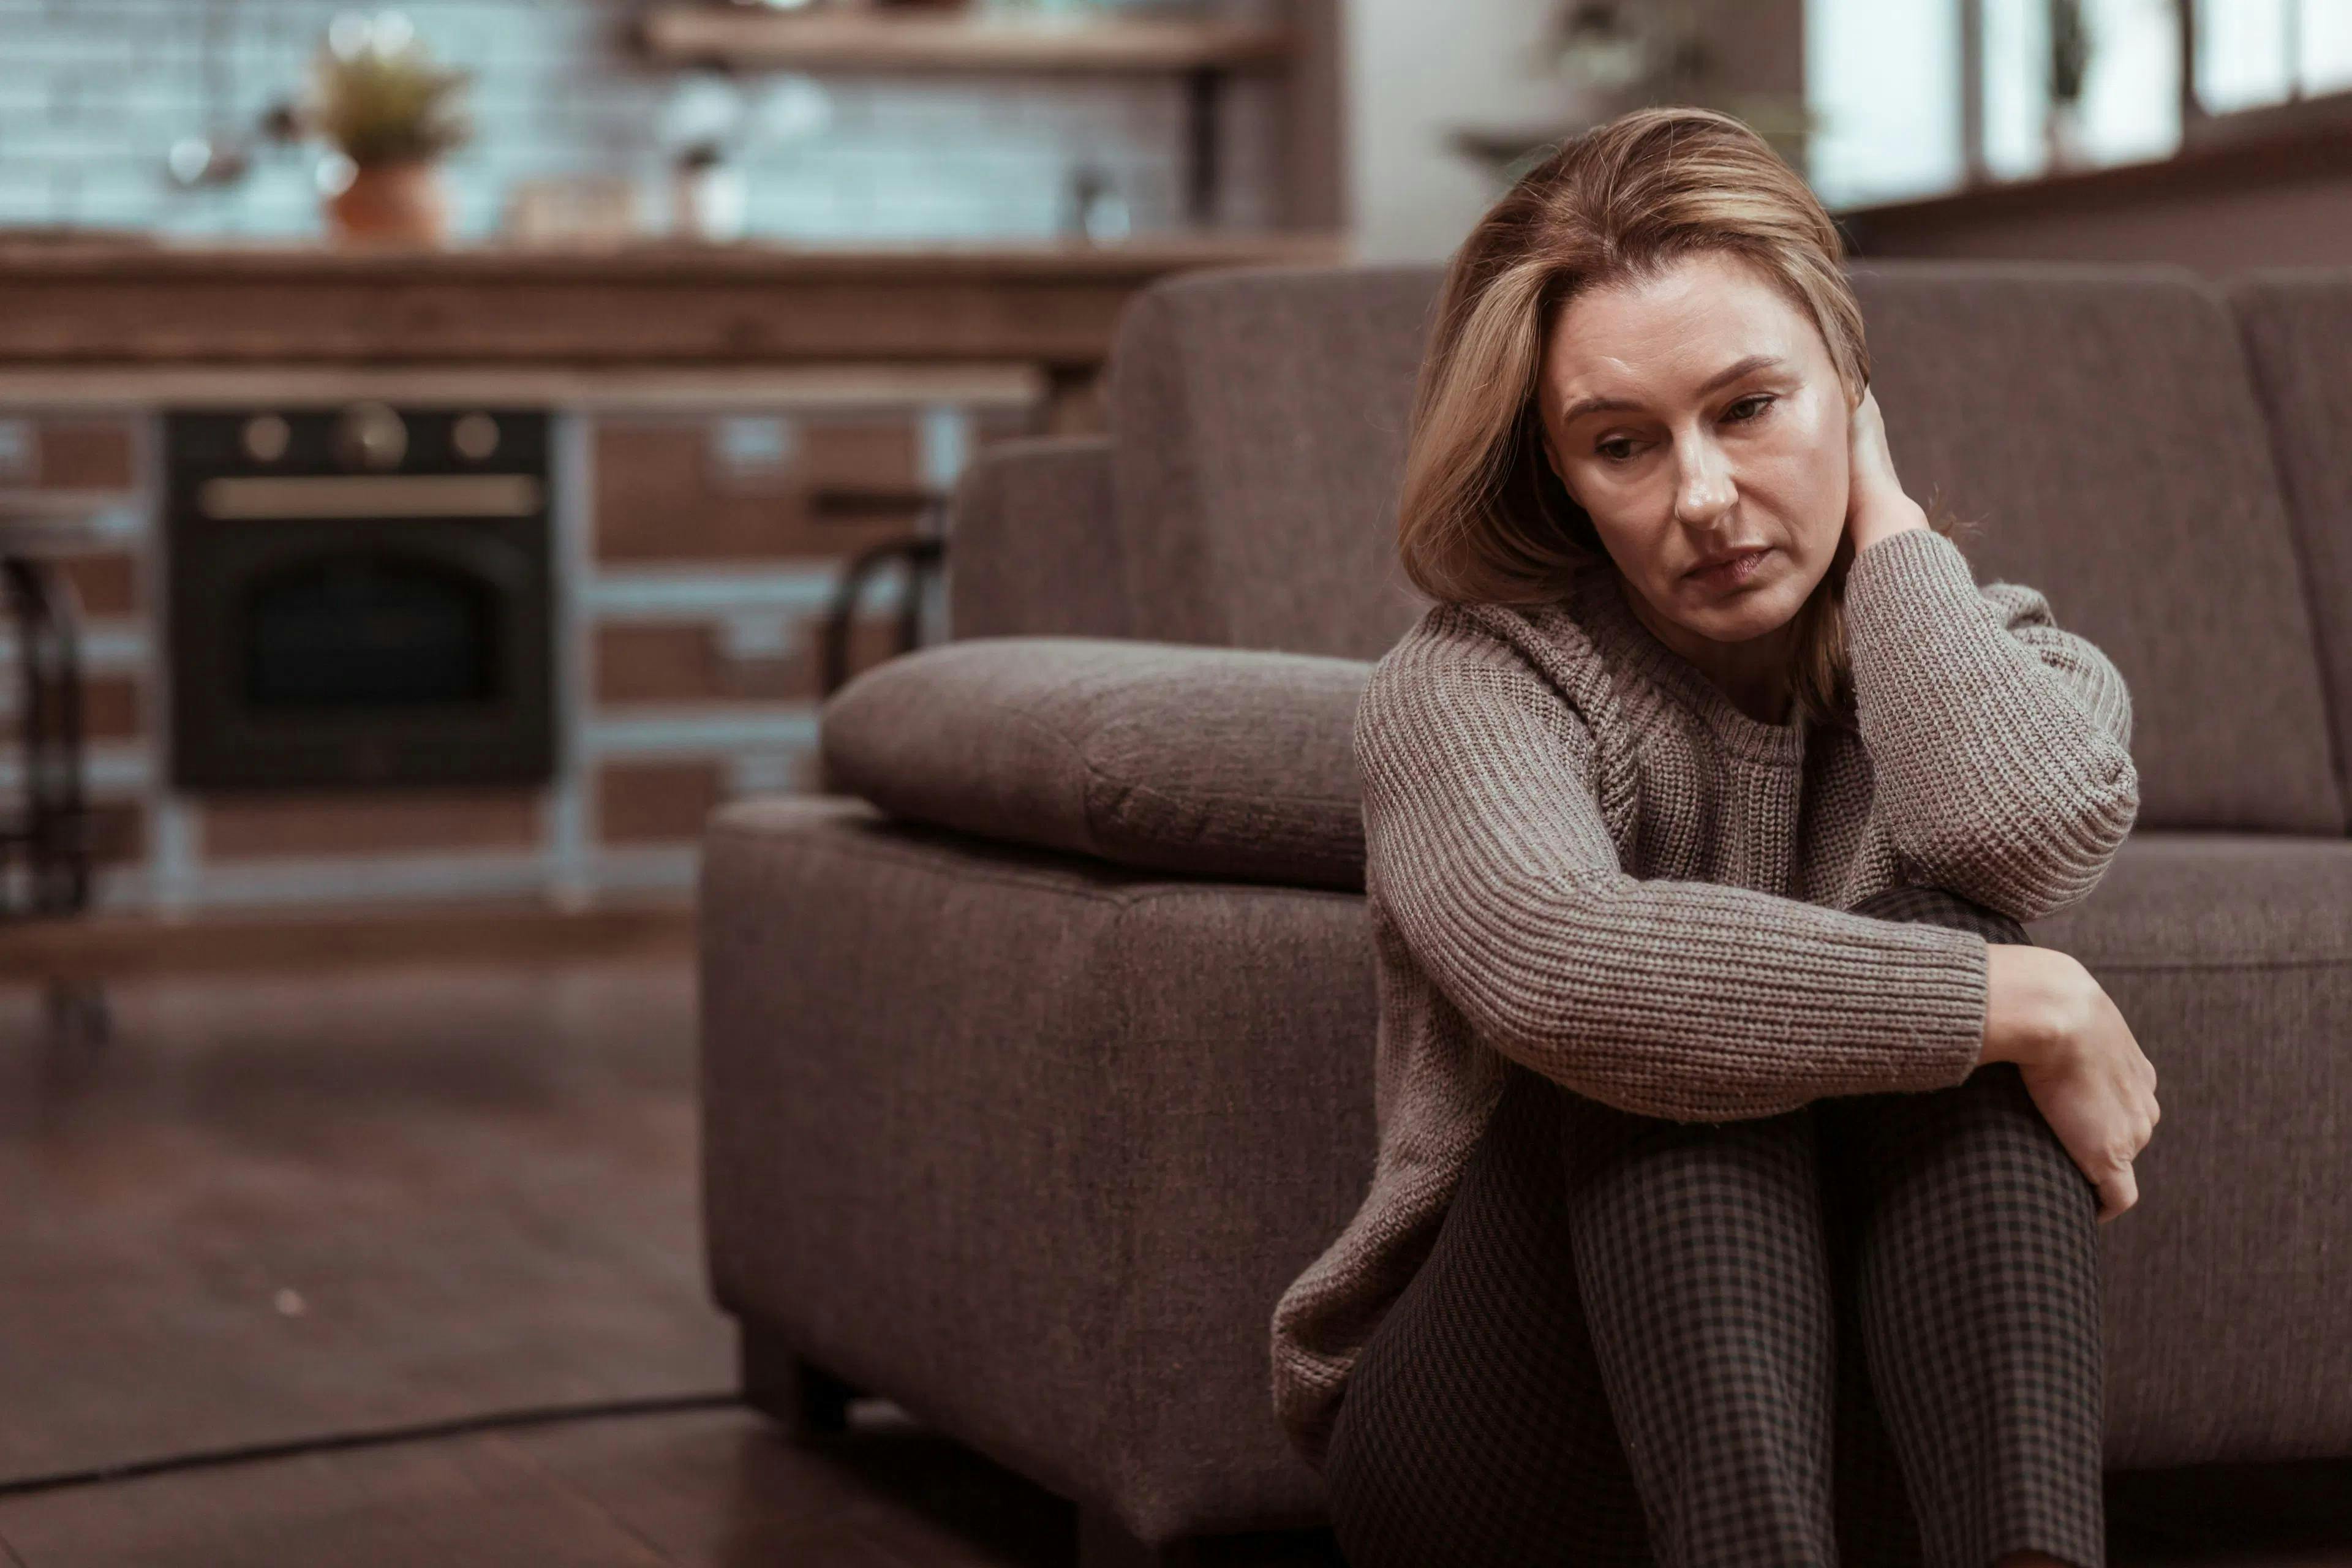 Does menopause really cause depression? | Image Credit: © zinkevych - © zinkevych - stock.adobe.com.